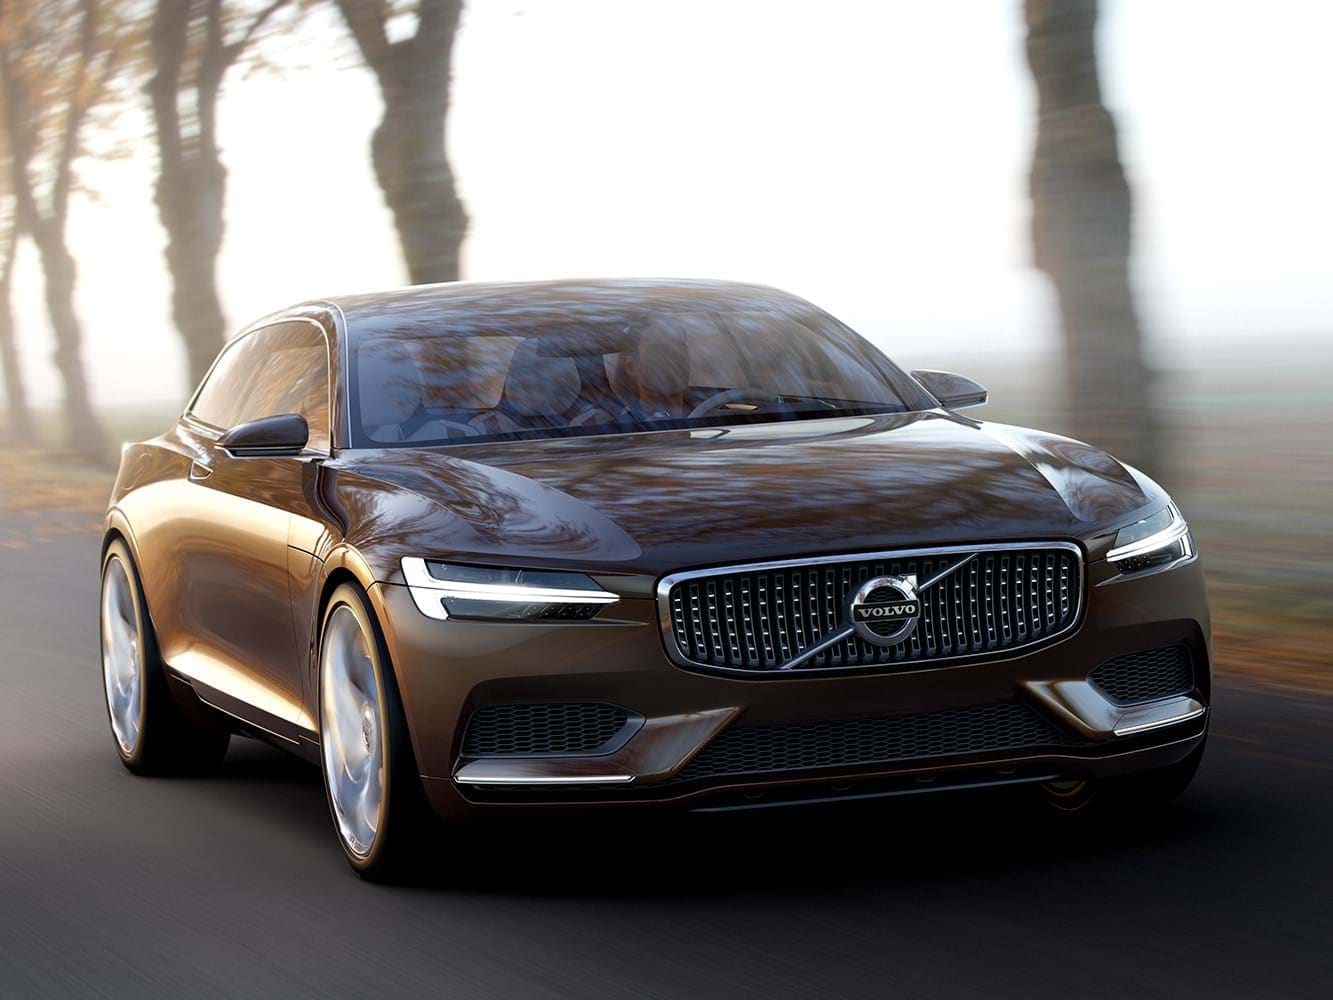 The Volvo Concept Estate drives along a tree-lined road